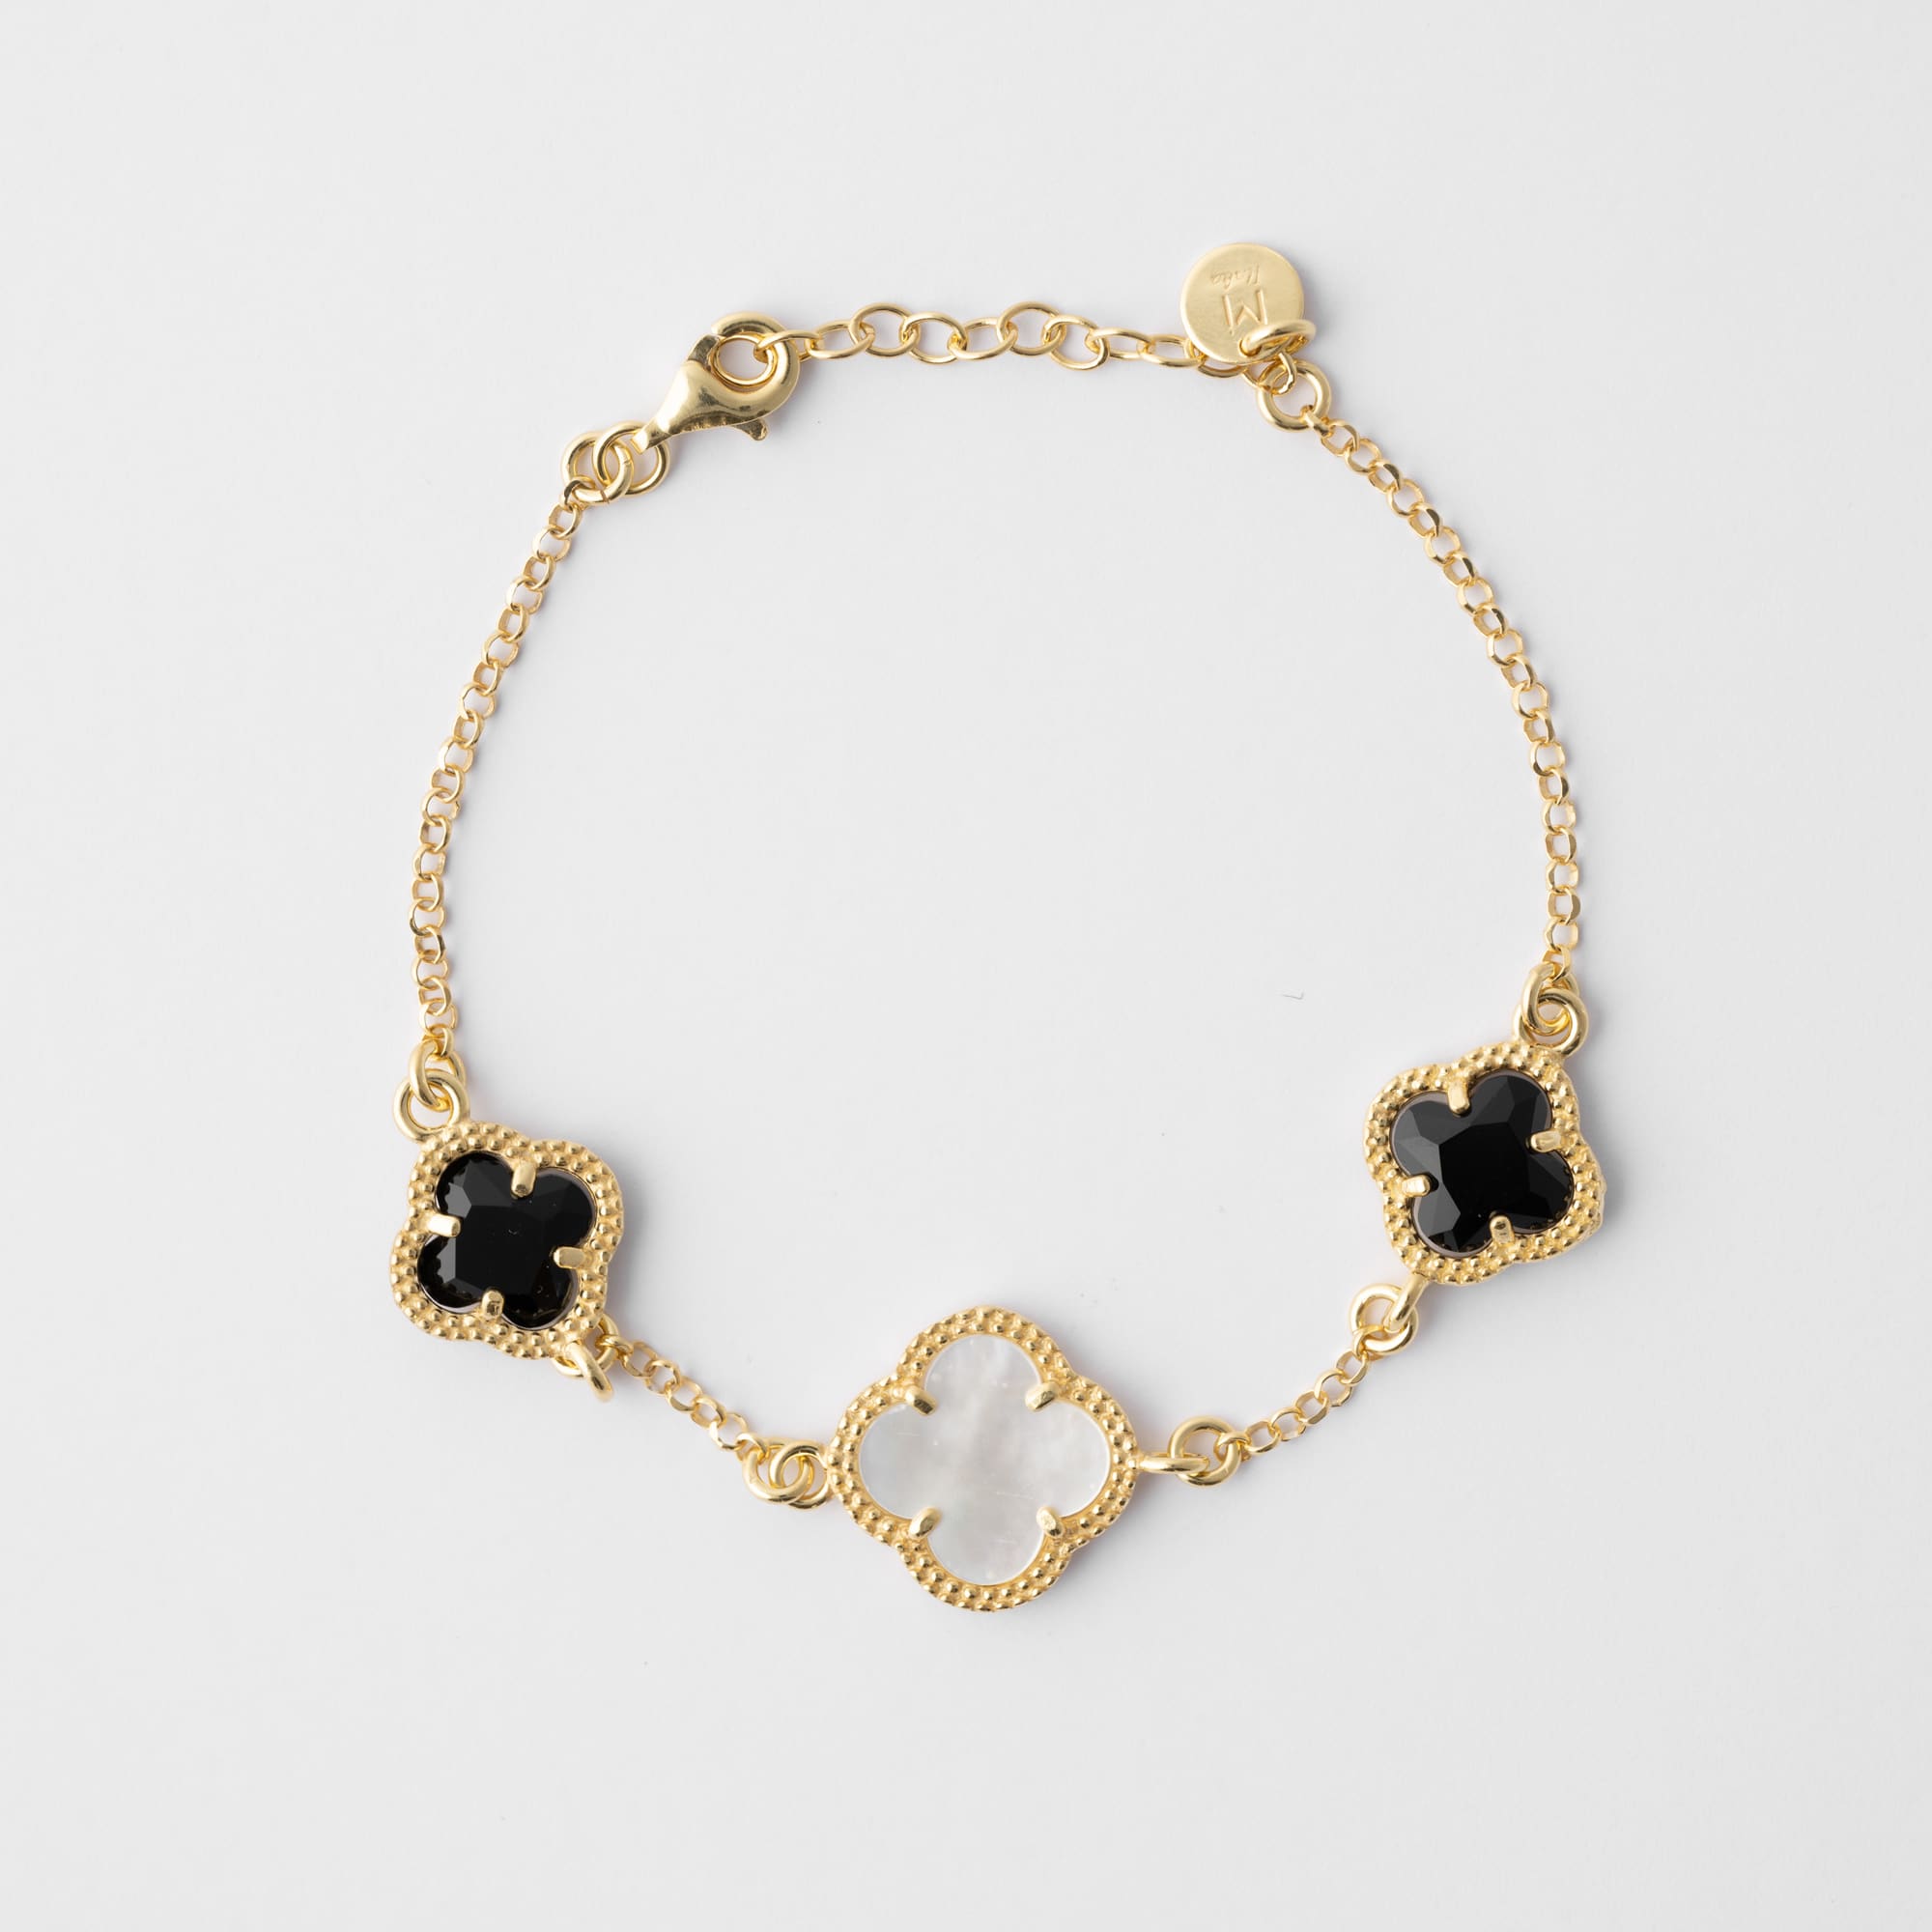 Clover bracelet with black quartz and mother of pearl